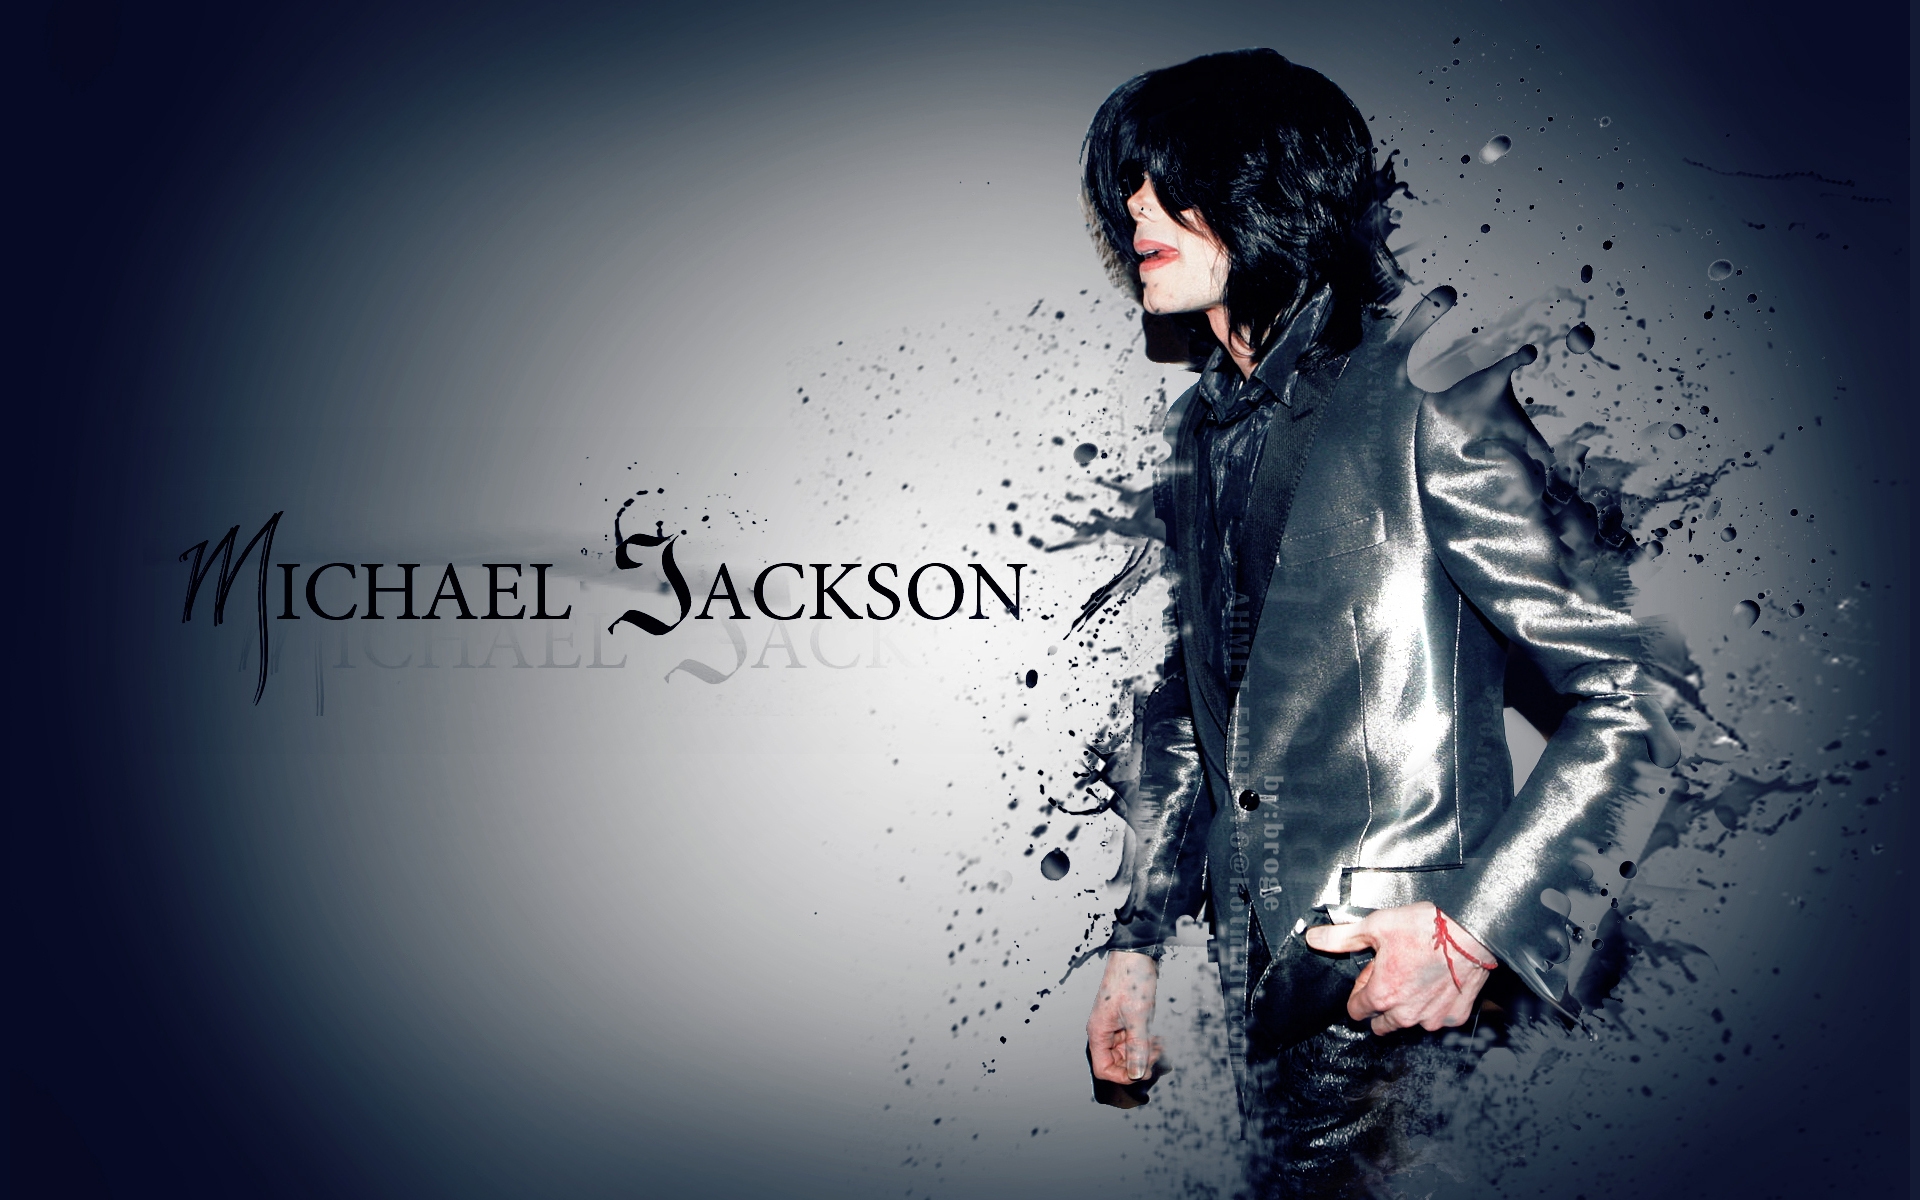 48x1152 Michael Jackson Glamorous Wallpapers 48x1152 Resolution Wallpaper Hd Celebrities 4k Wallpapers Images Photos And Background